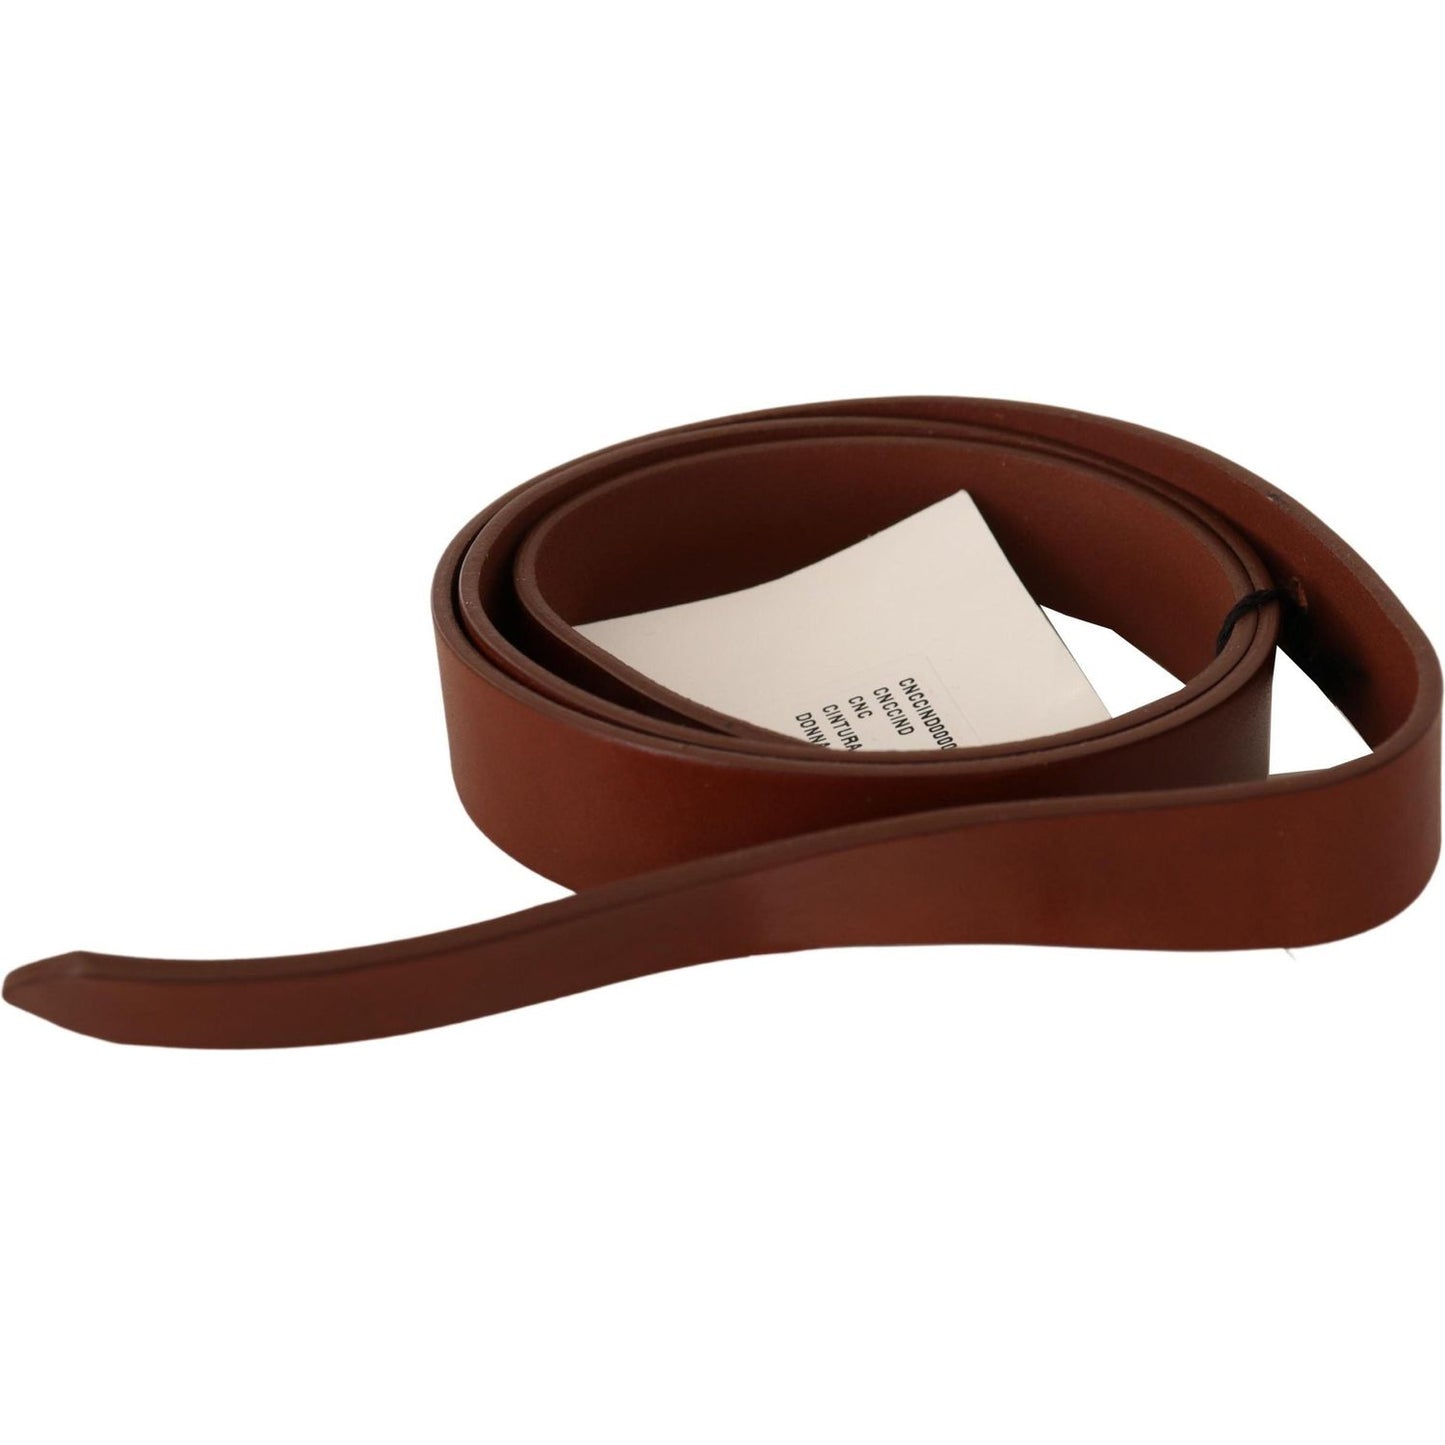 Costume National Elegant Brown Leather Fashion Belt WOMAN BELTS brown-leather-silver-fastening-belt IMG_7147-scaled-0ade469d-a72.jpg